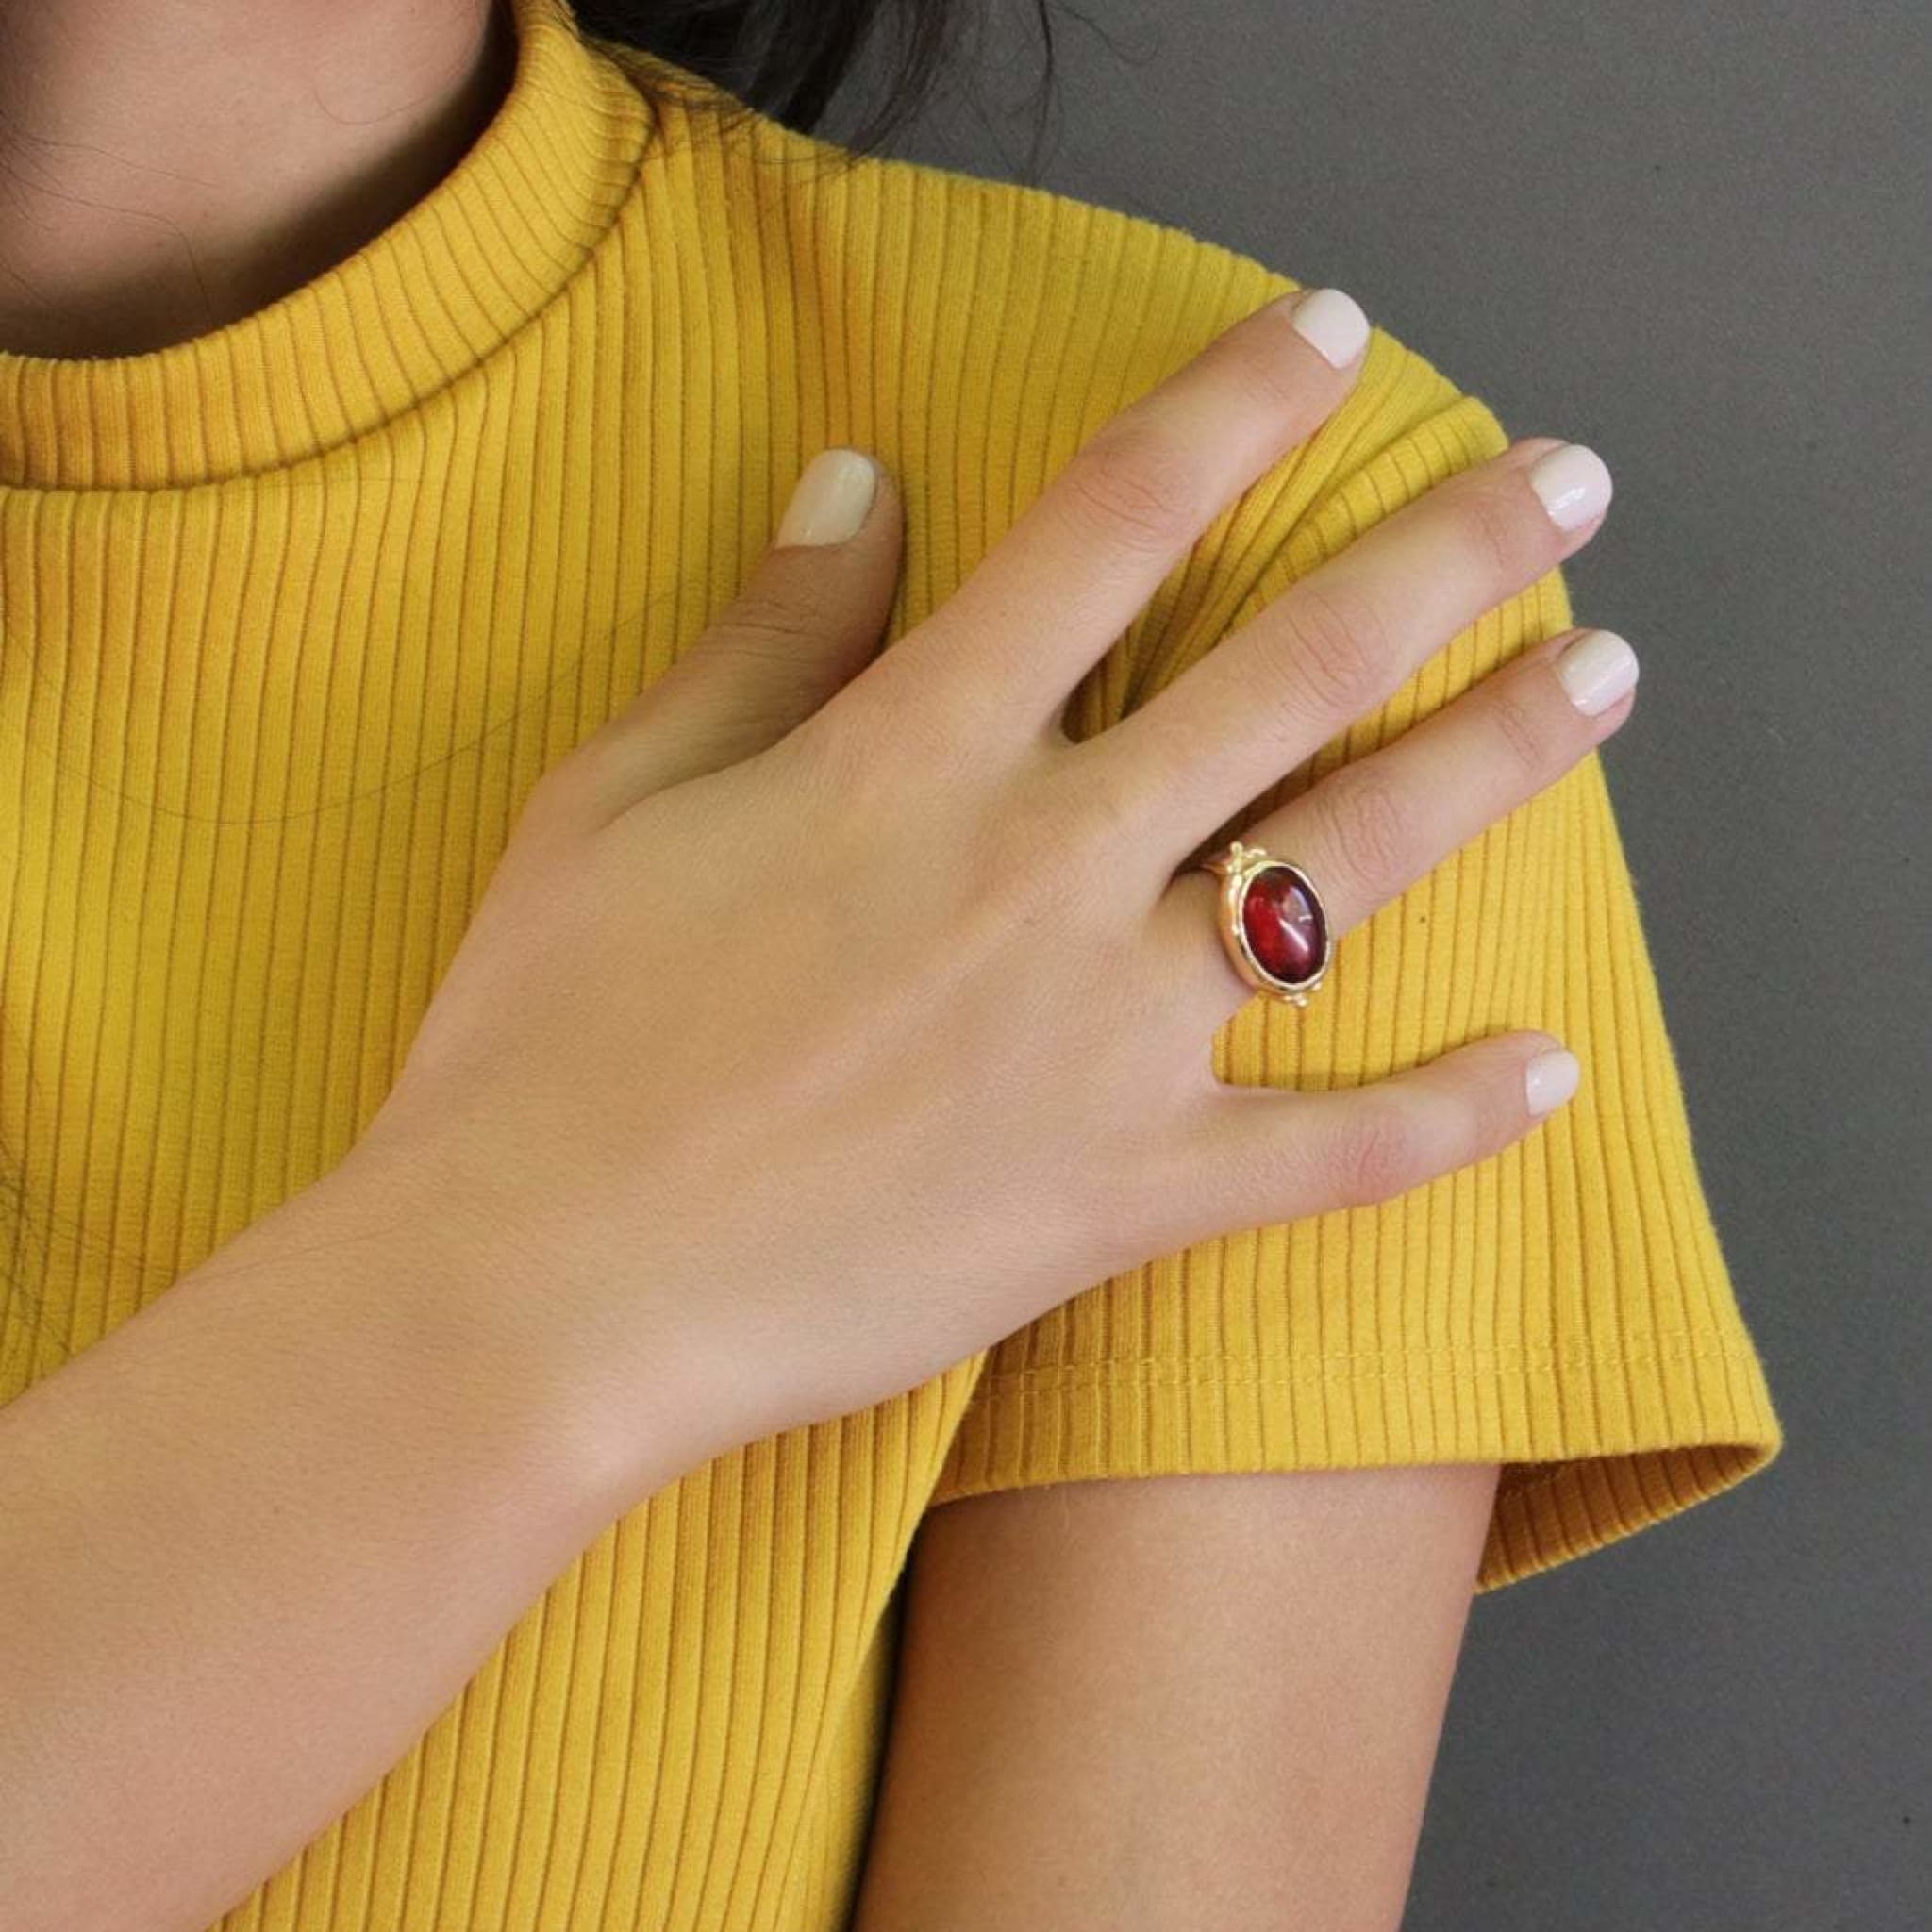 14k Gold Ring with Oval Carnelian Stone